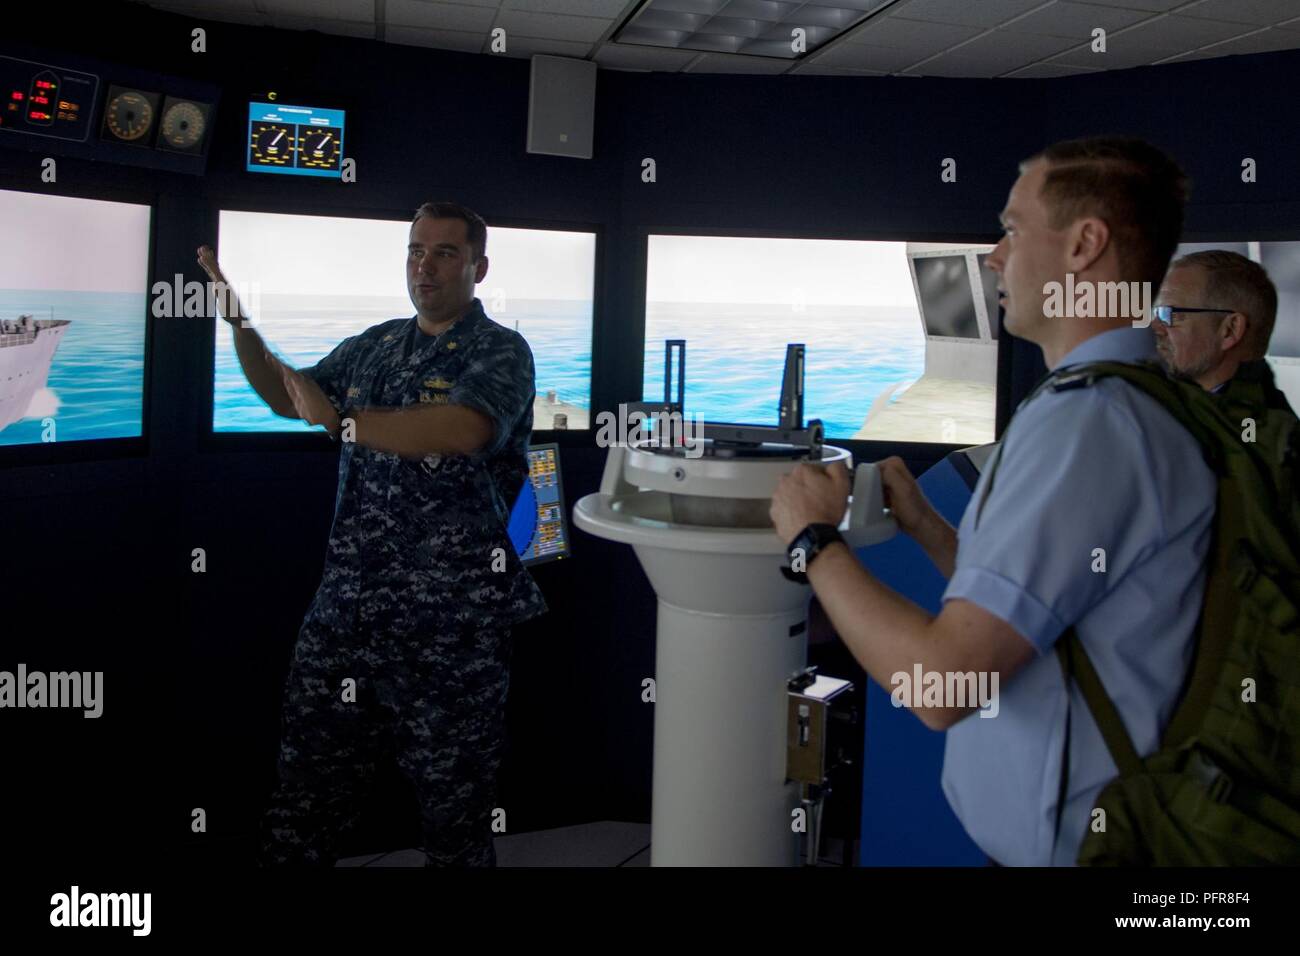 Everett, Wash. (May 21, 2018) Lt. Cmdr. Matt Farrell, executive officer of Afloat Training Group Pacific Northwest, explains the duties of a conning officer to German Army officer, Maj. Joachim Ruthe, in the navigation, seamanship and ship handling trainer in Naval Station Everett (NSE). Ruthe and his fellow officers are enrolled in the International General/Admiral Staff Officer Course and are touring NSE. Stock Photo